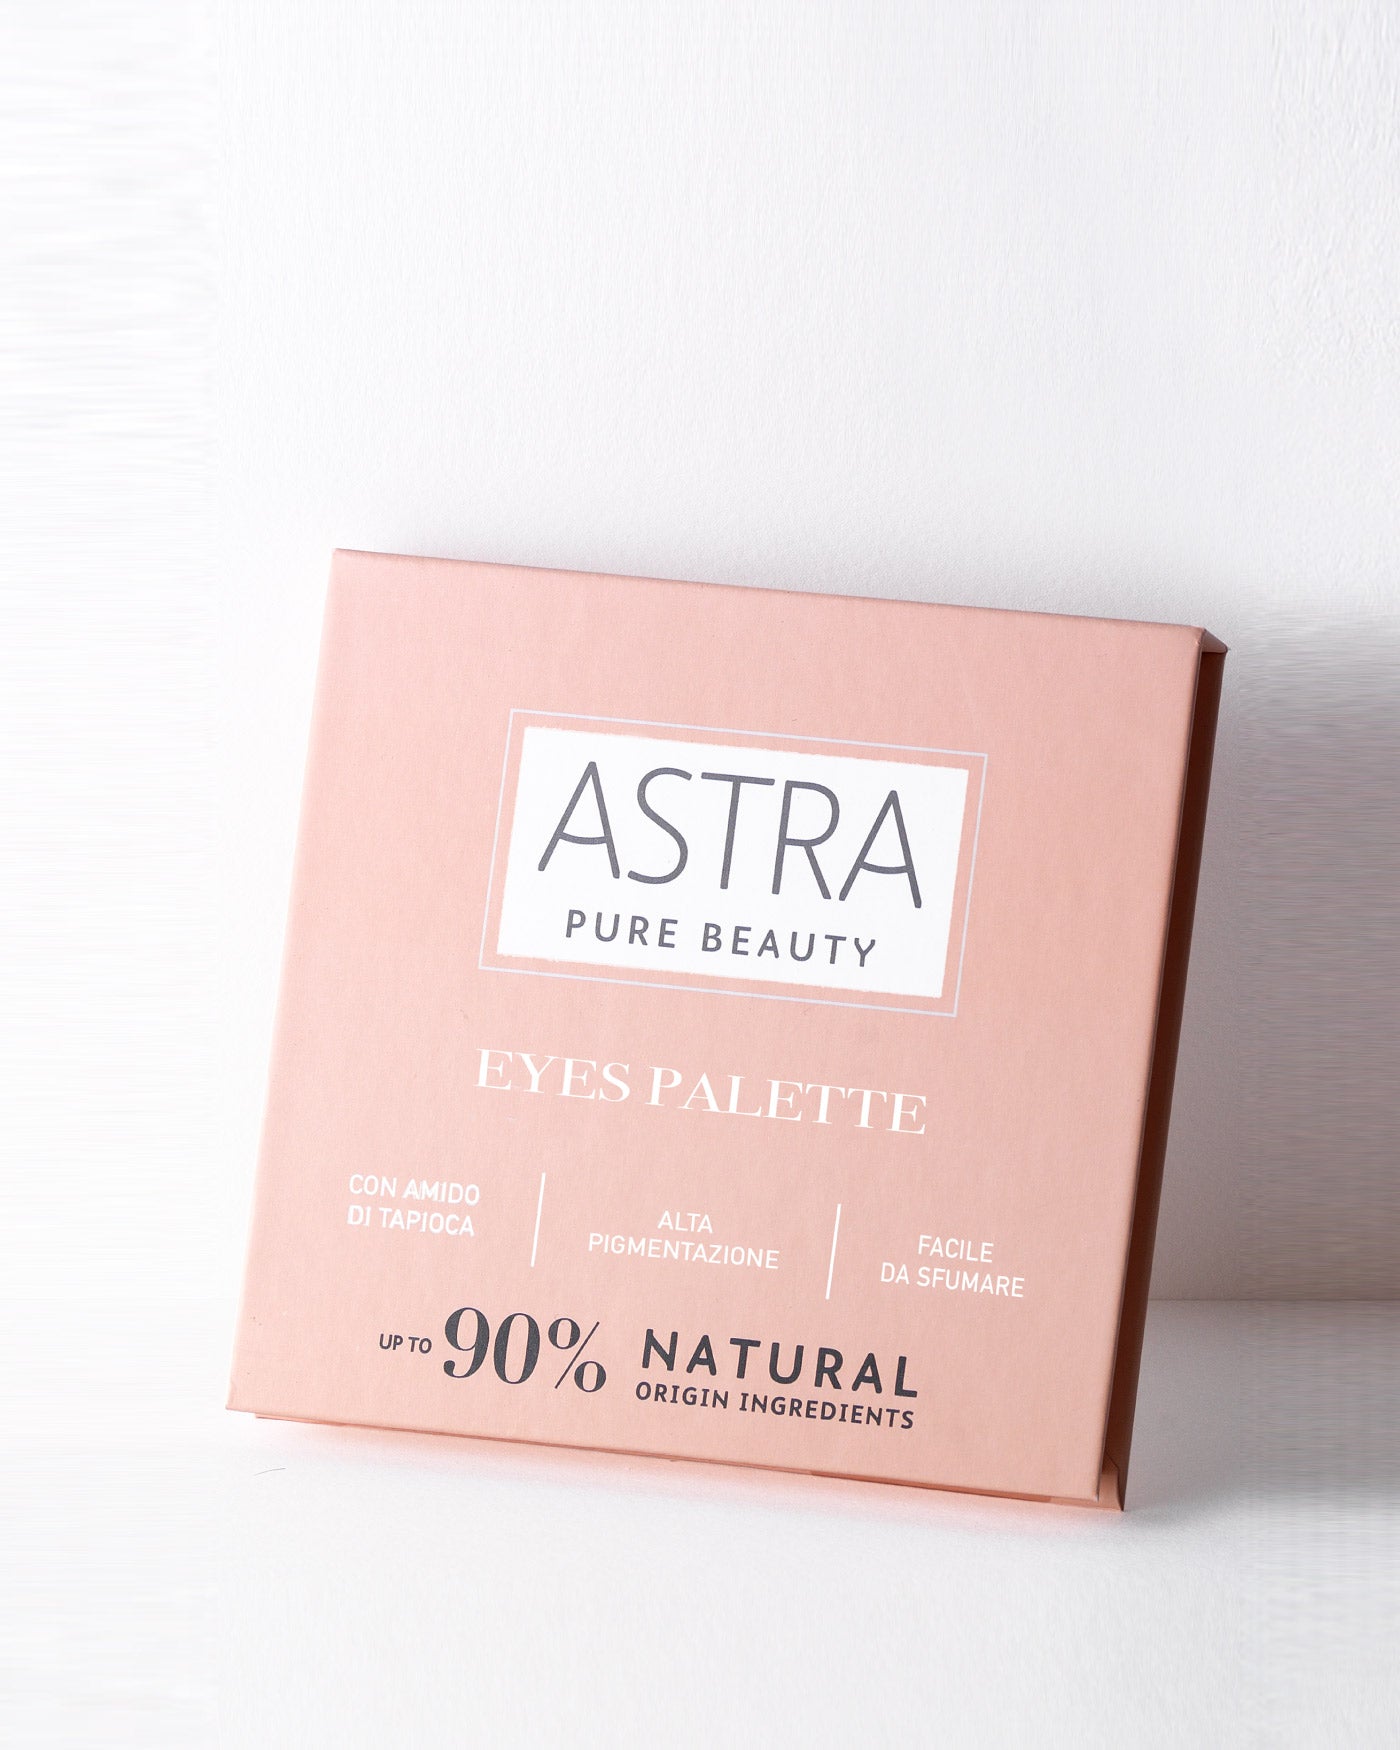 PURE BEAUTY EYES PALETTE - Palette Occhi 9 Ombretti - Pure Beauty Occhi - Astra Make-Up